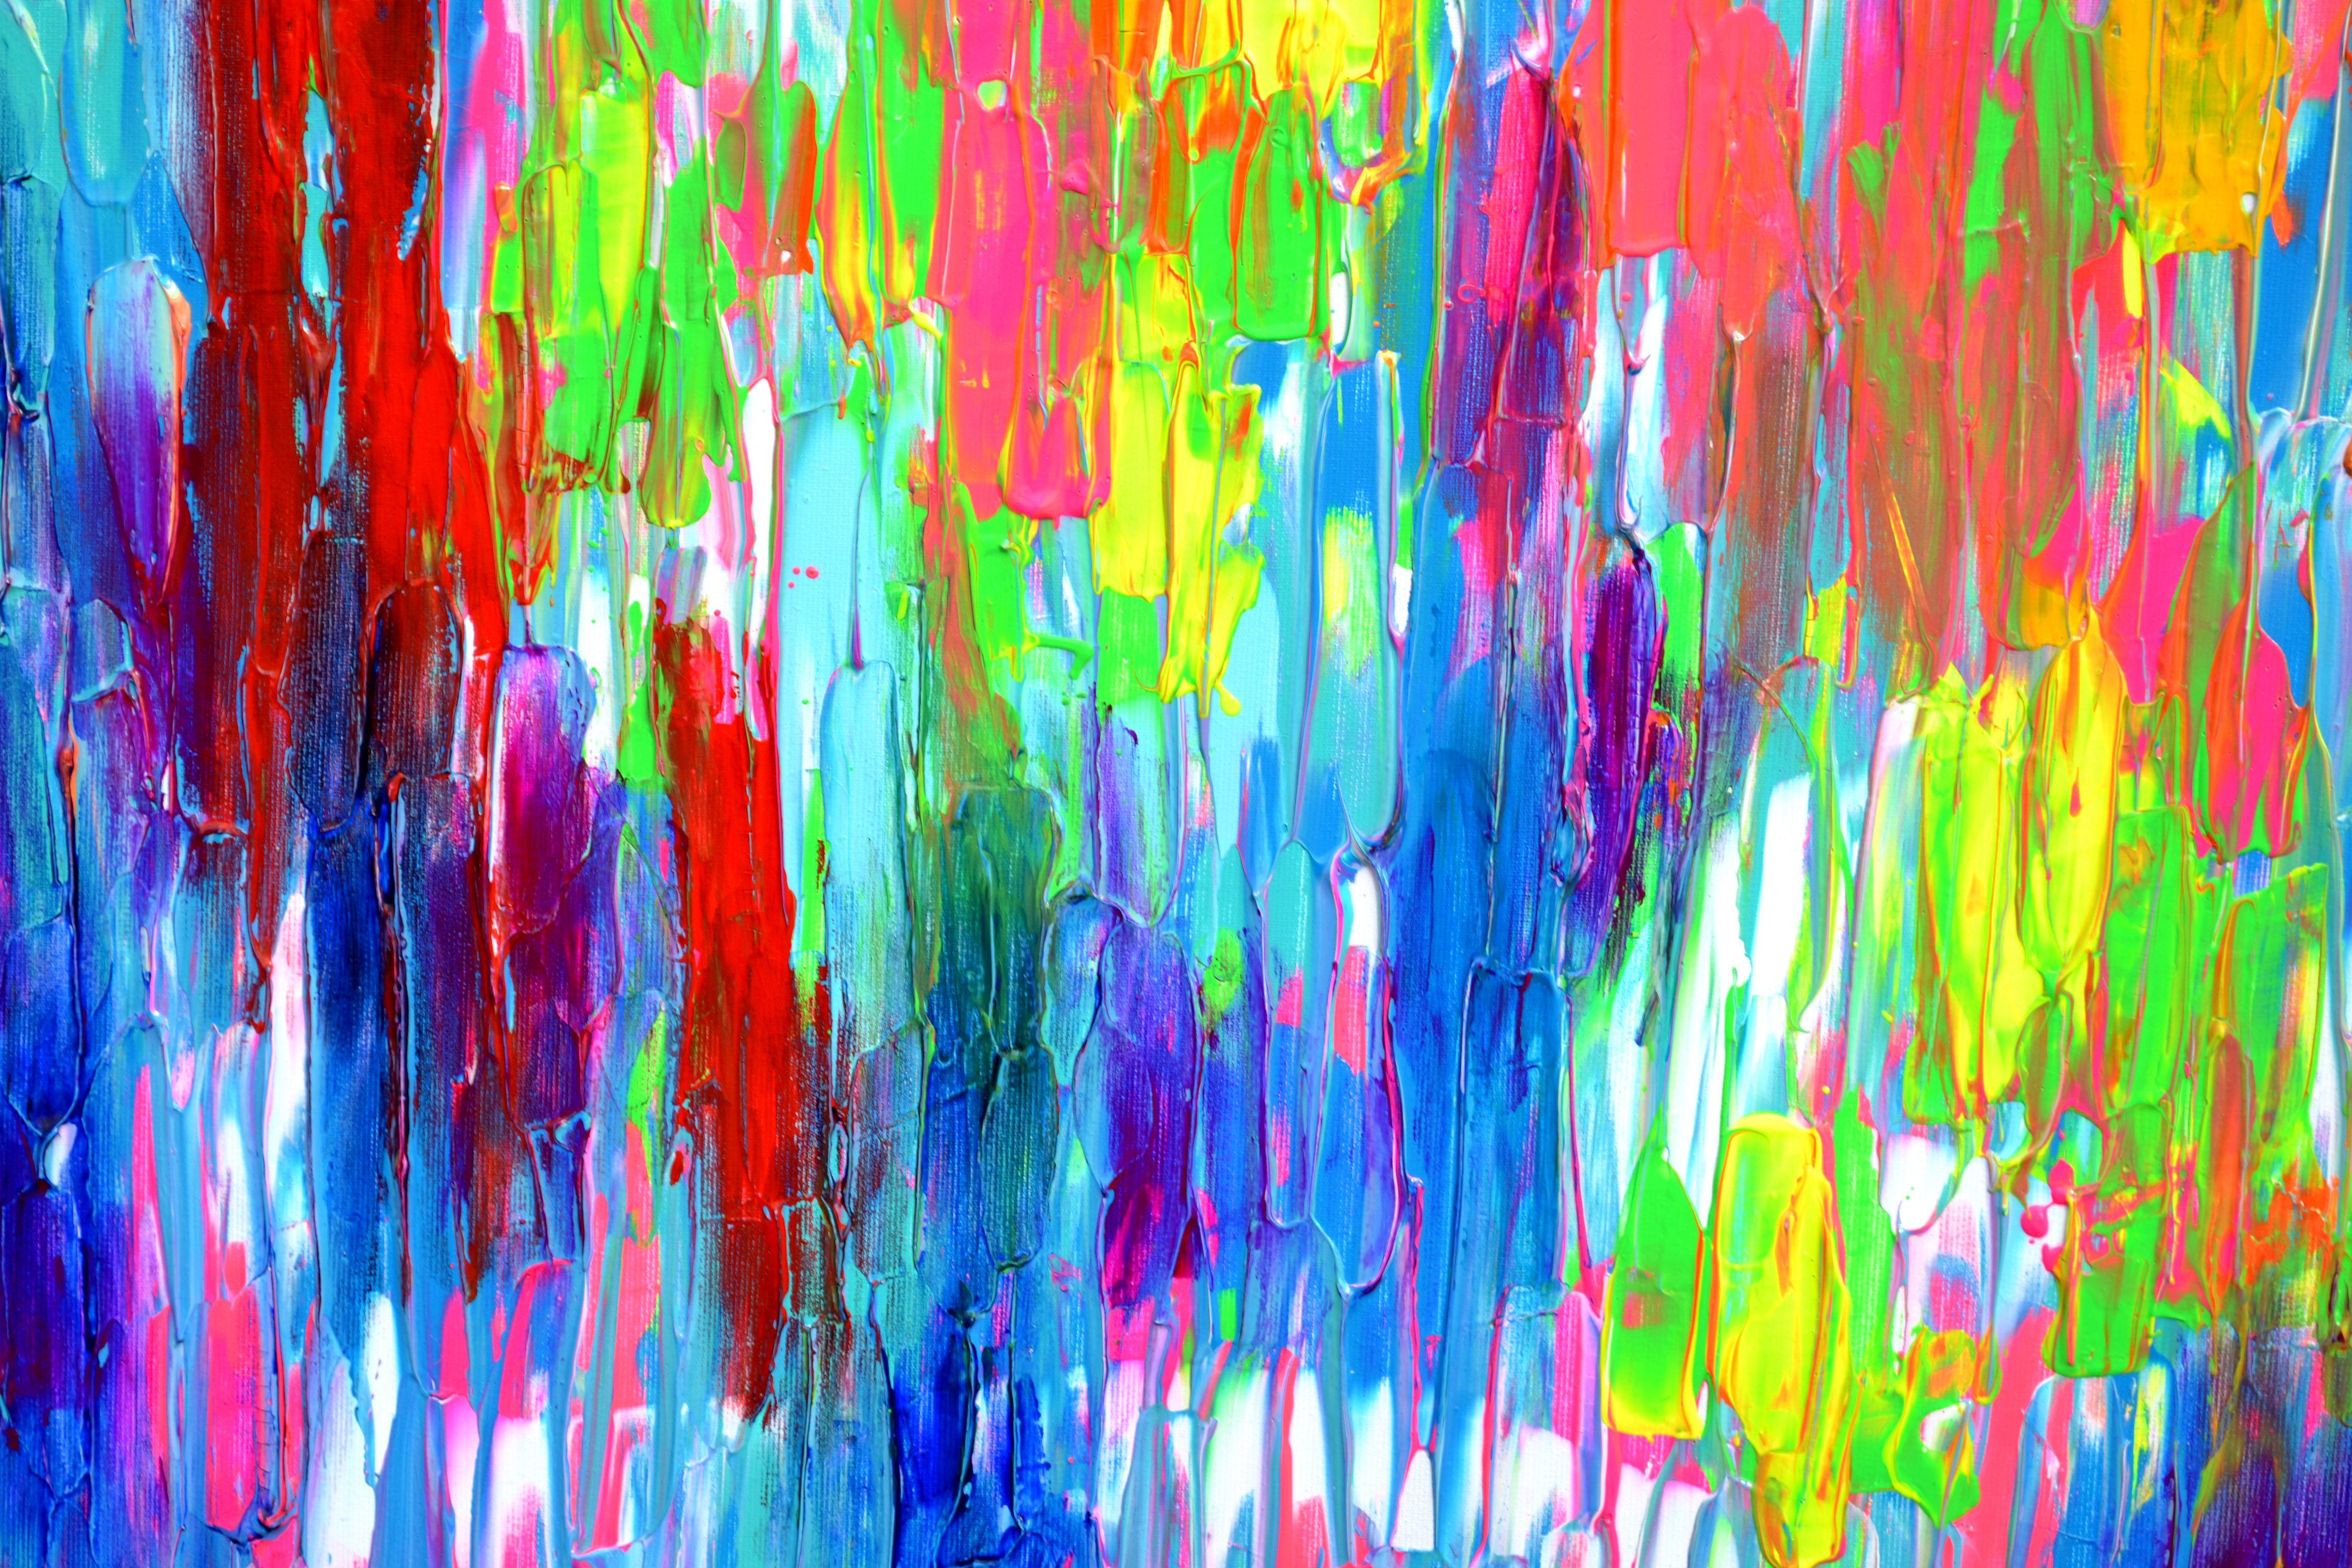 A very beautiful large colorful abstract painting with many neon nuances, havy textured with palette knife, vibrant and emotional.  READY TO HANG - GALLERY QUALITY  It's all about colors happiness and freedom!  Dimensions: 160x80X4 cm - 63x31.5x1.6